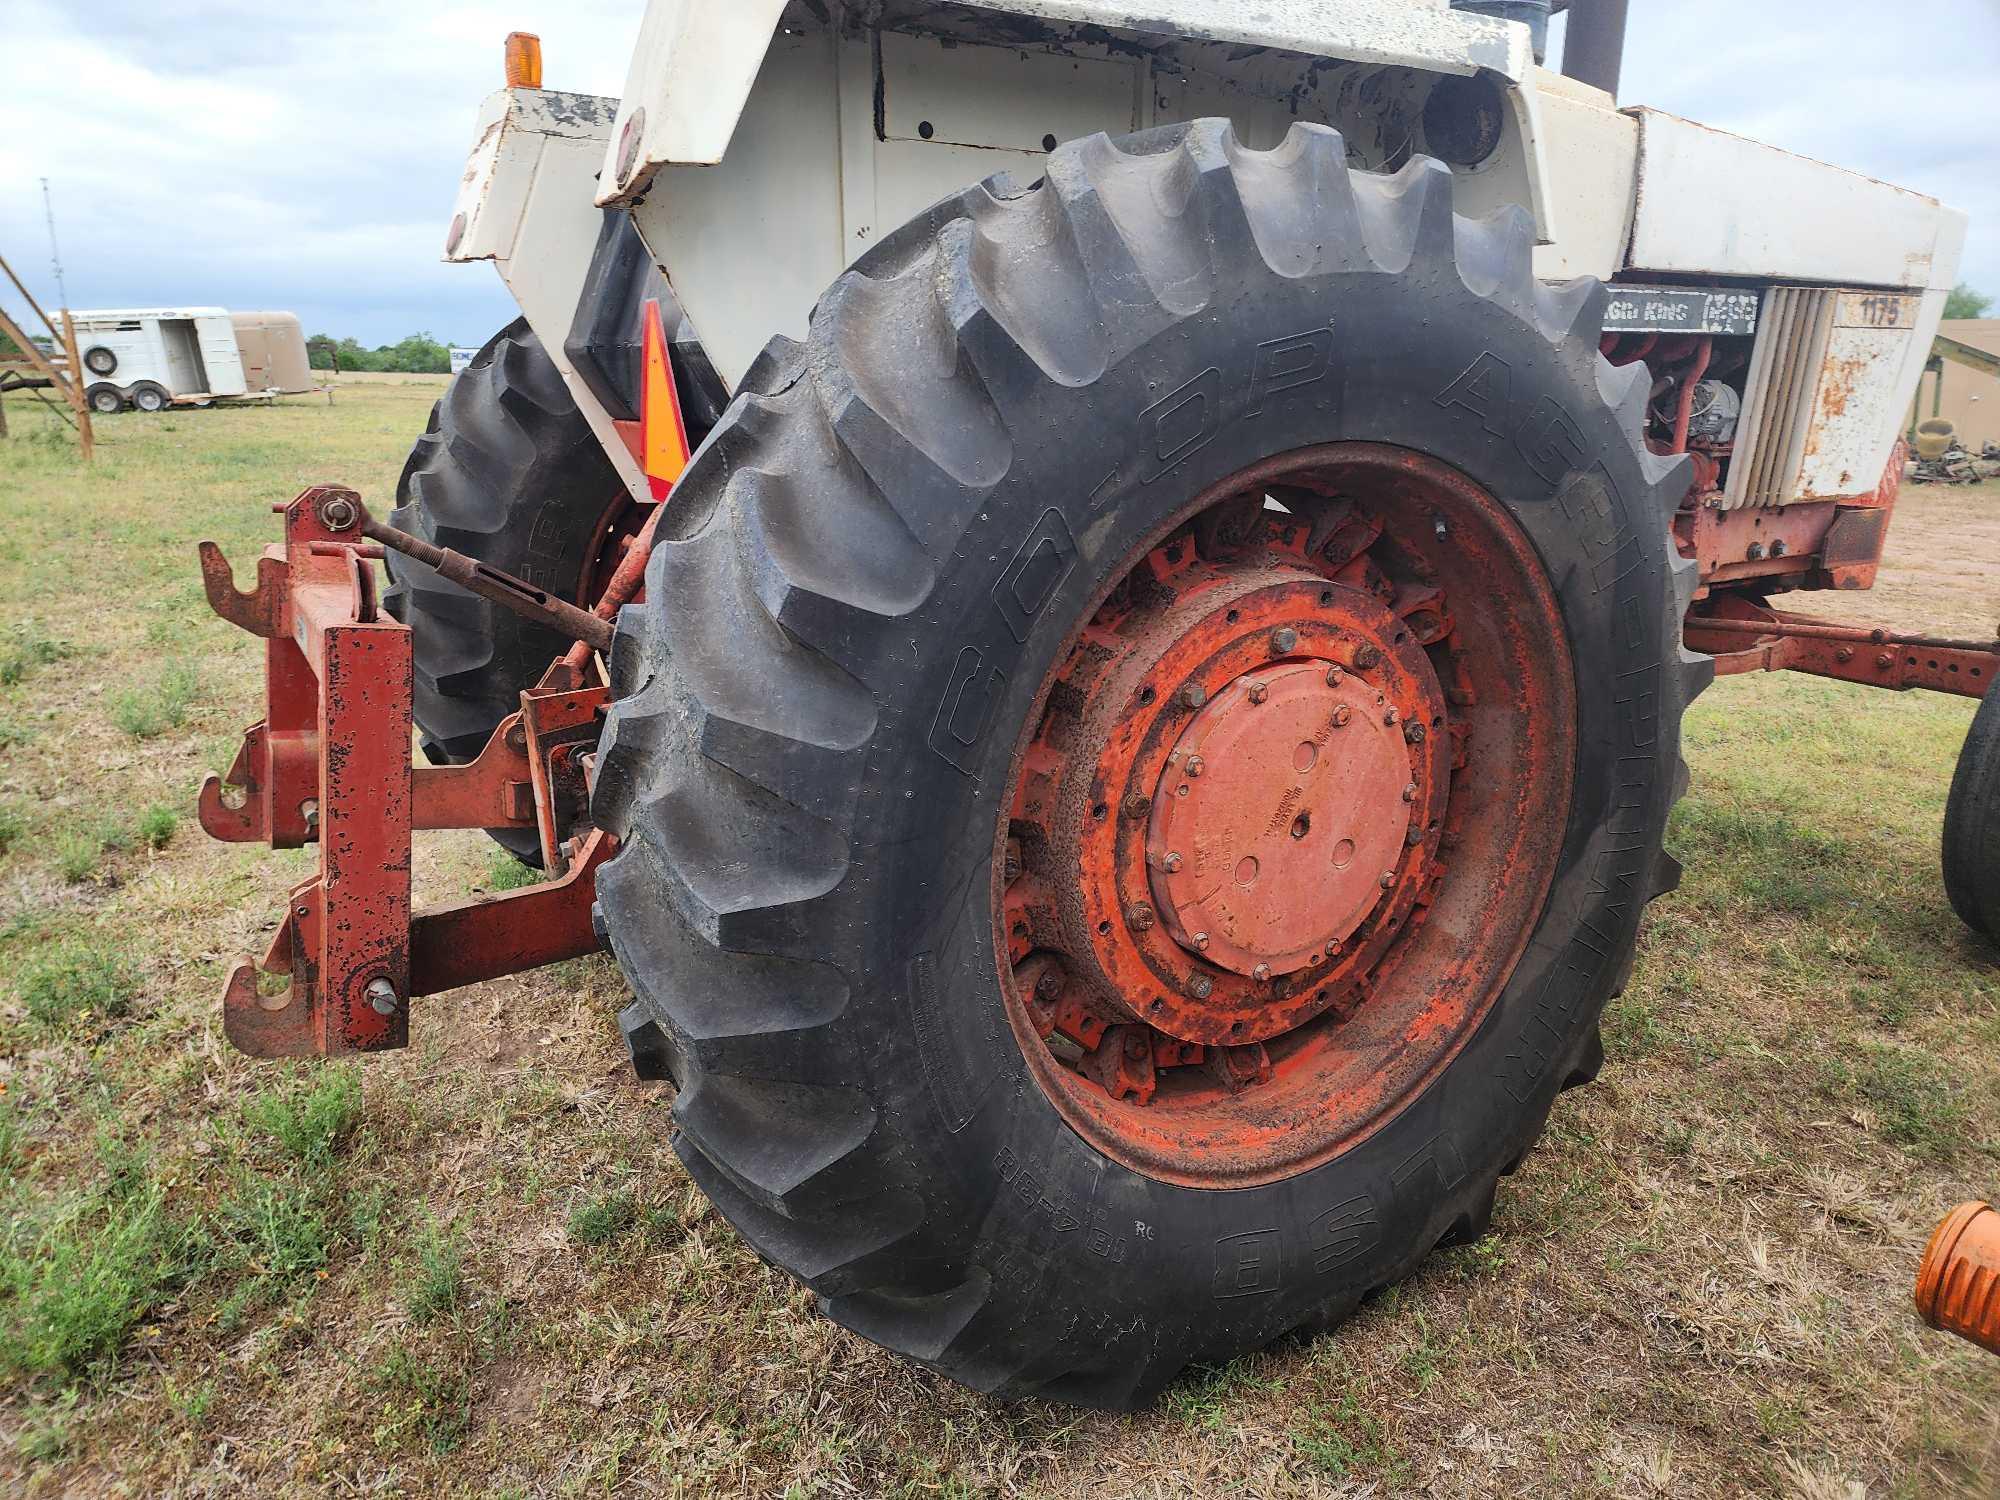 1974 Case Agri King 1175 Tractor w/(2) Tractor Tires 18.4-38 on 16" Rims, 15-38